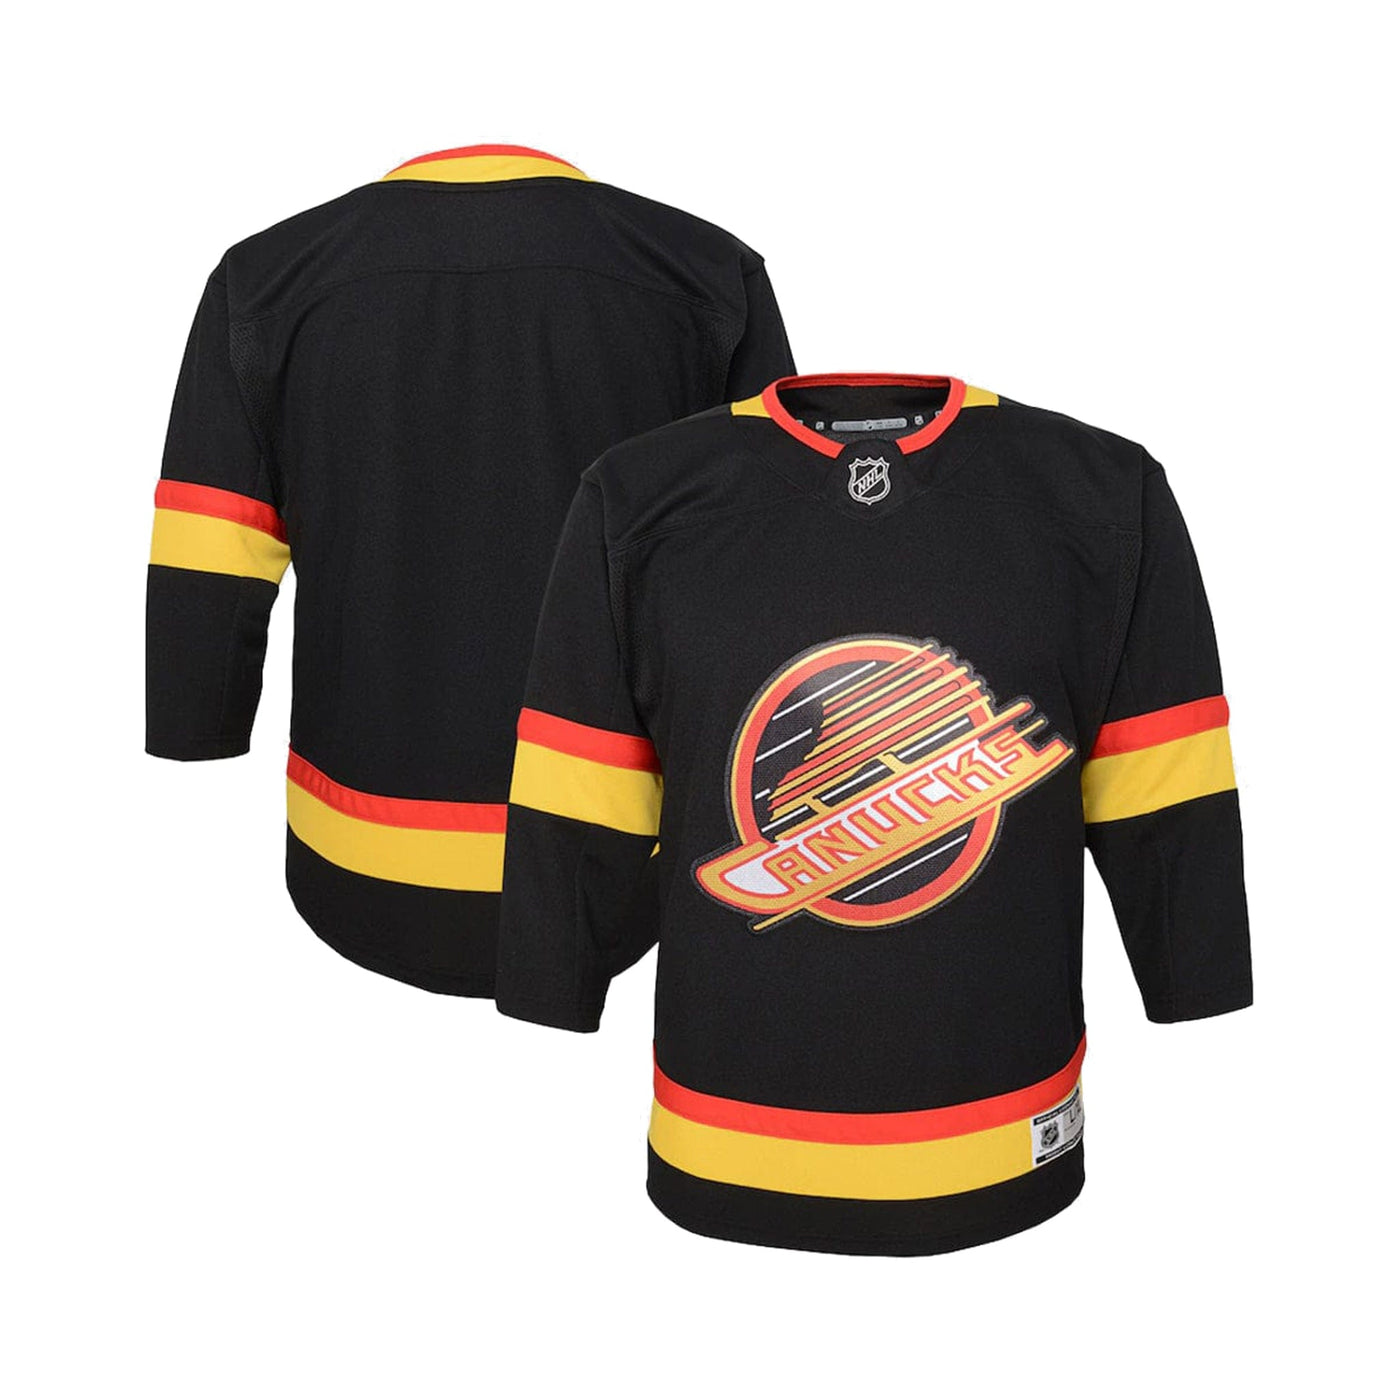 Vancouver Canucks Skate Outer Stuff Premier Infant Jersey - The Hockey Shop Source For Sports